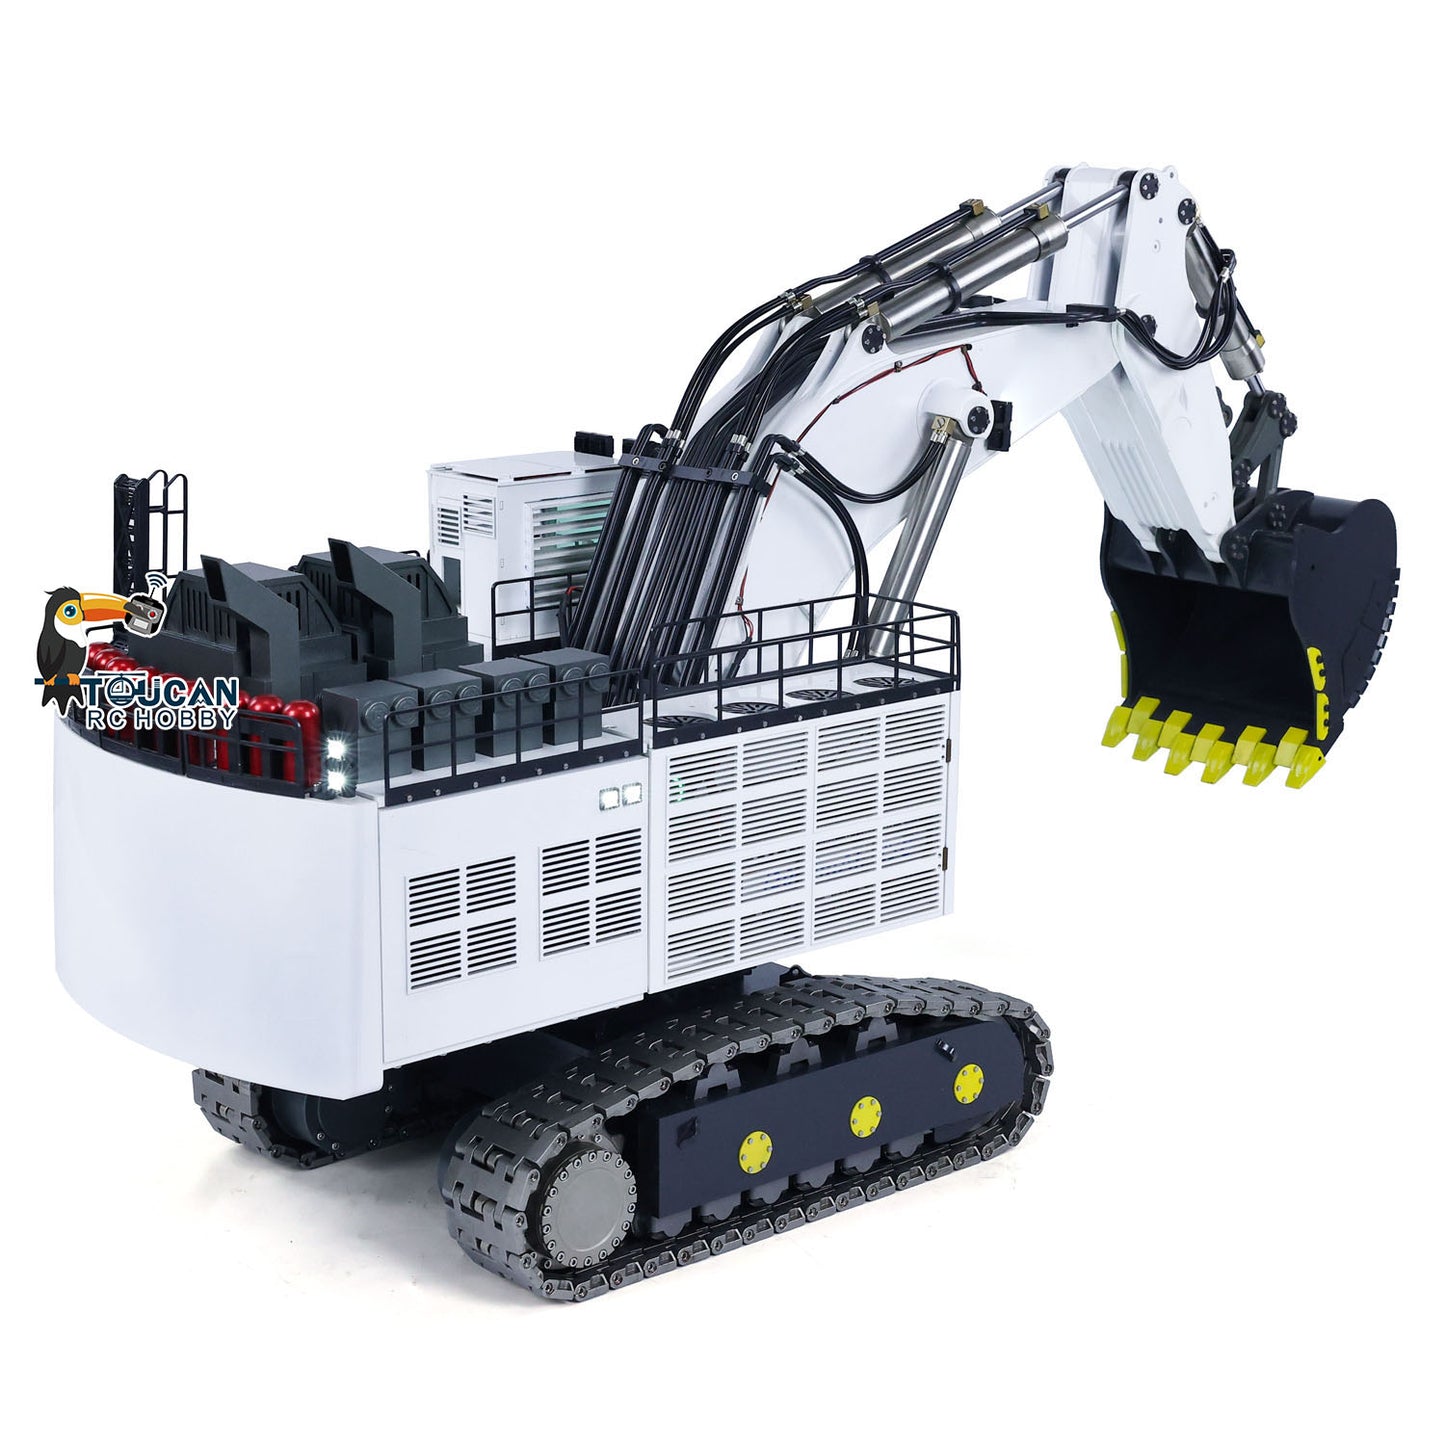 1/25 Double-pump Hydraulic RC Excavator RTR R9800 Diggers With Sound